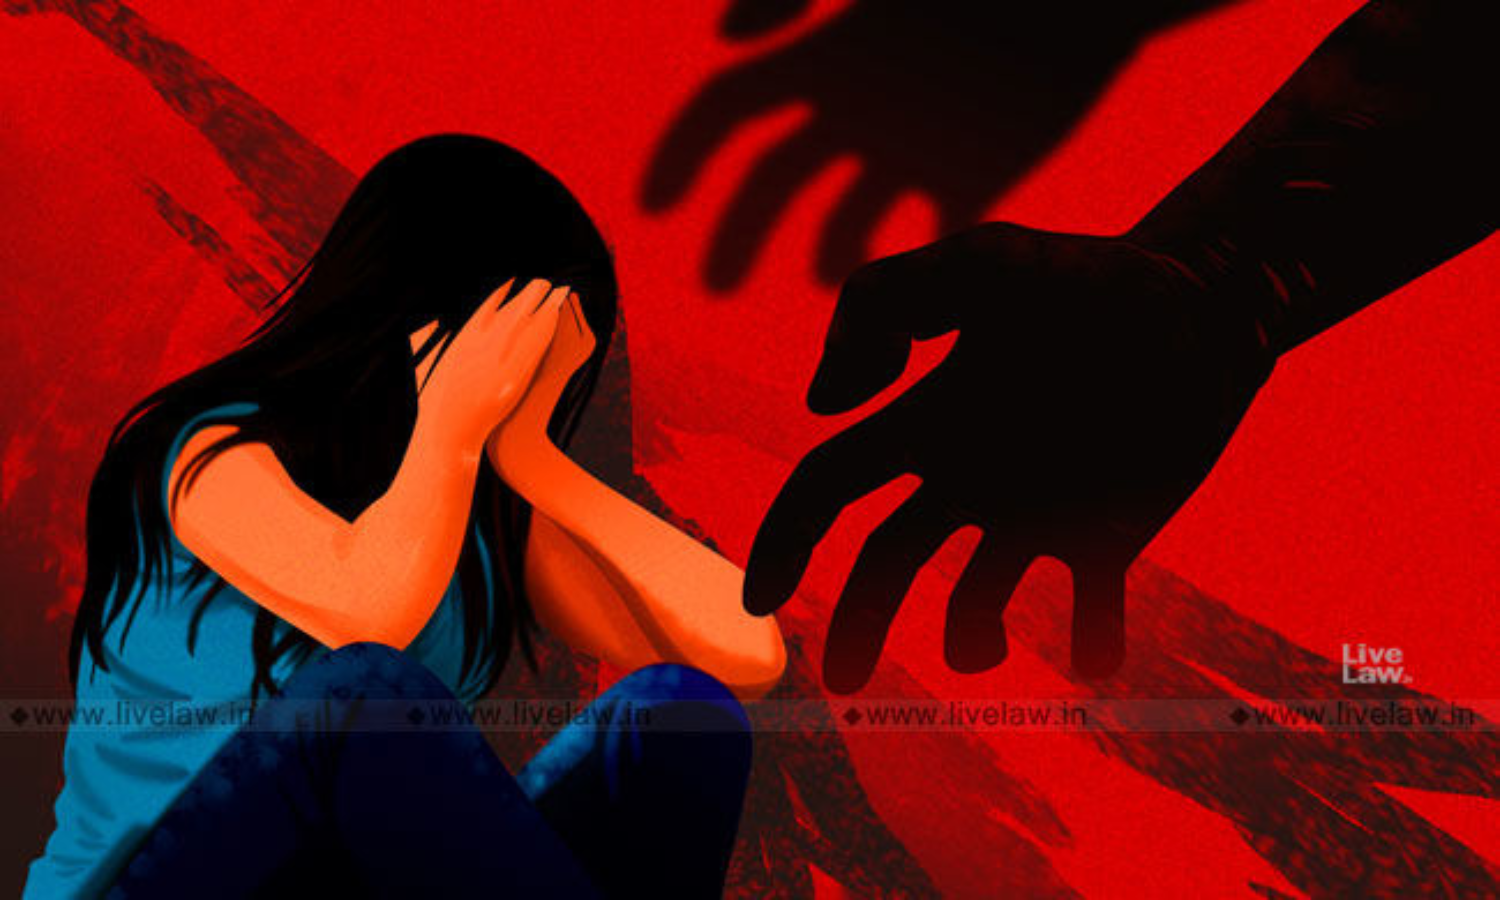 Kerala court sentences man to total 18 yrs in jail for abetting suicide of teen girl